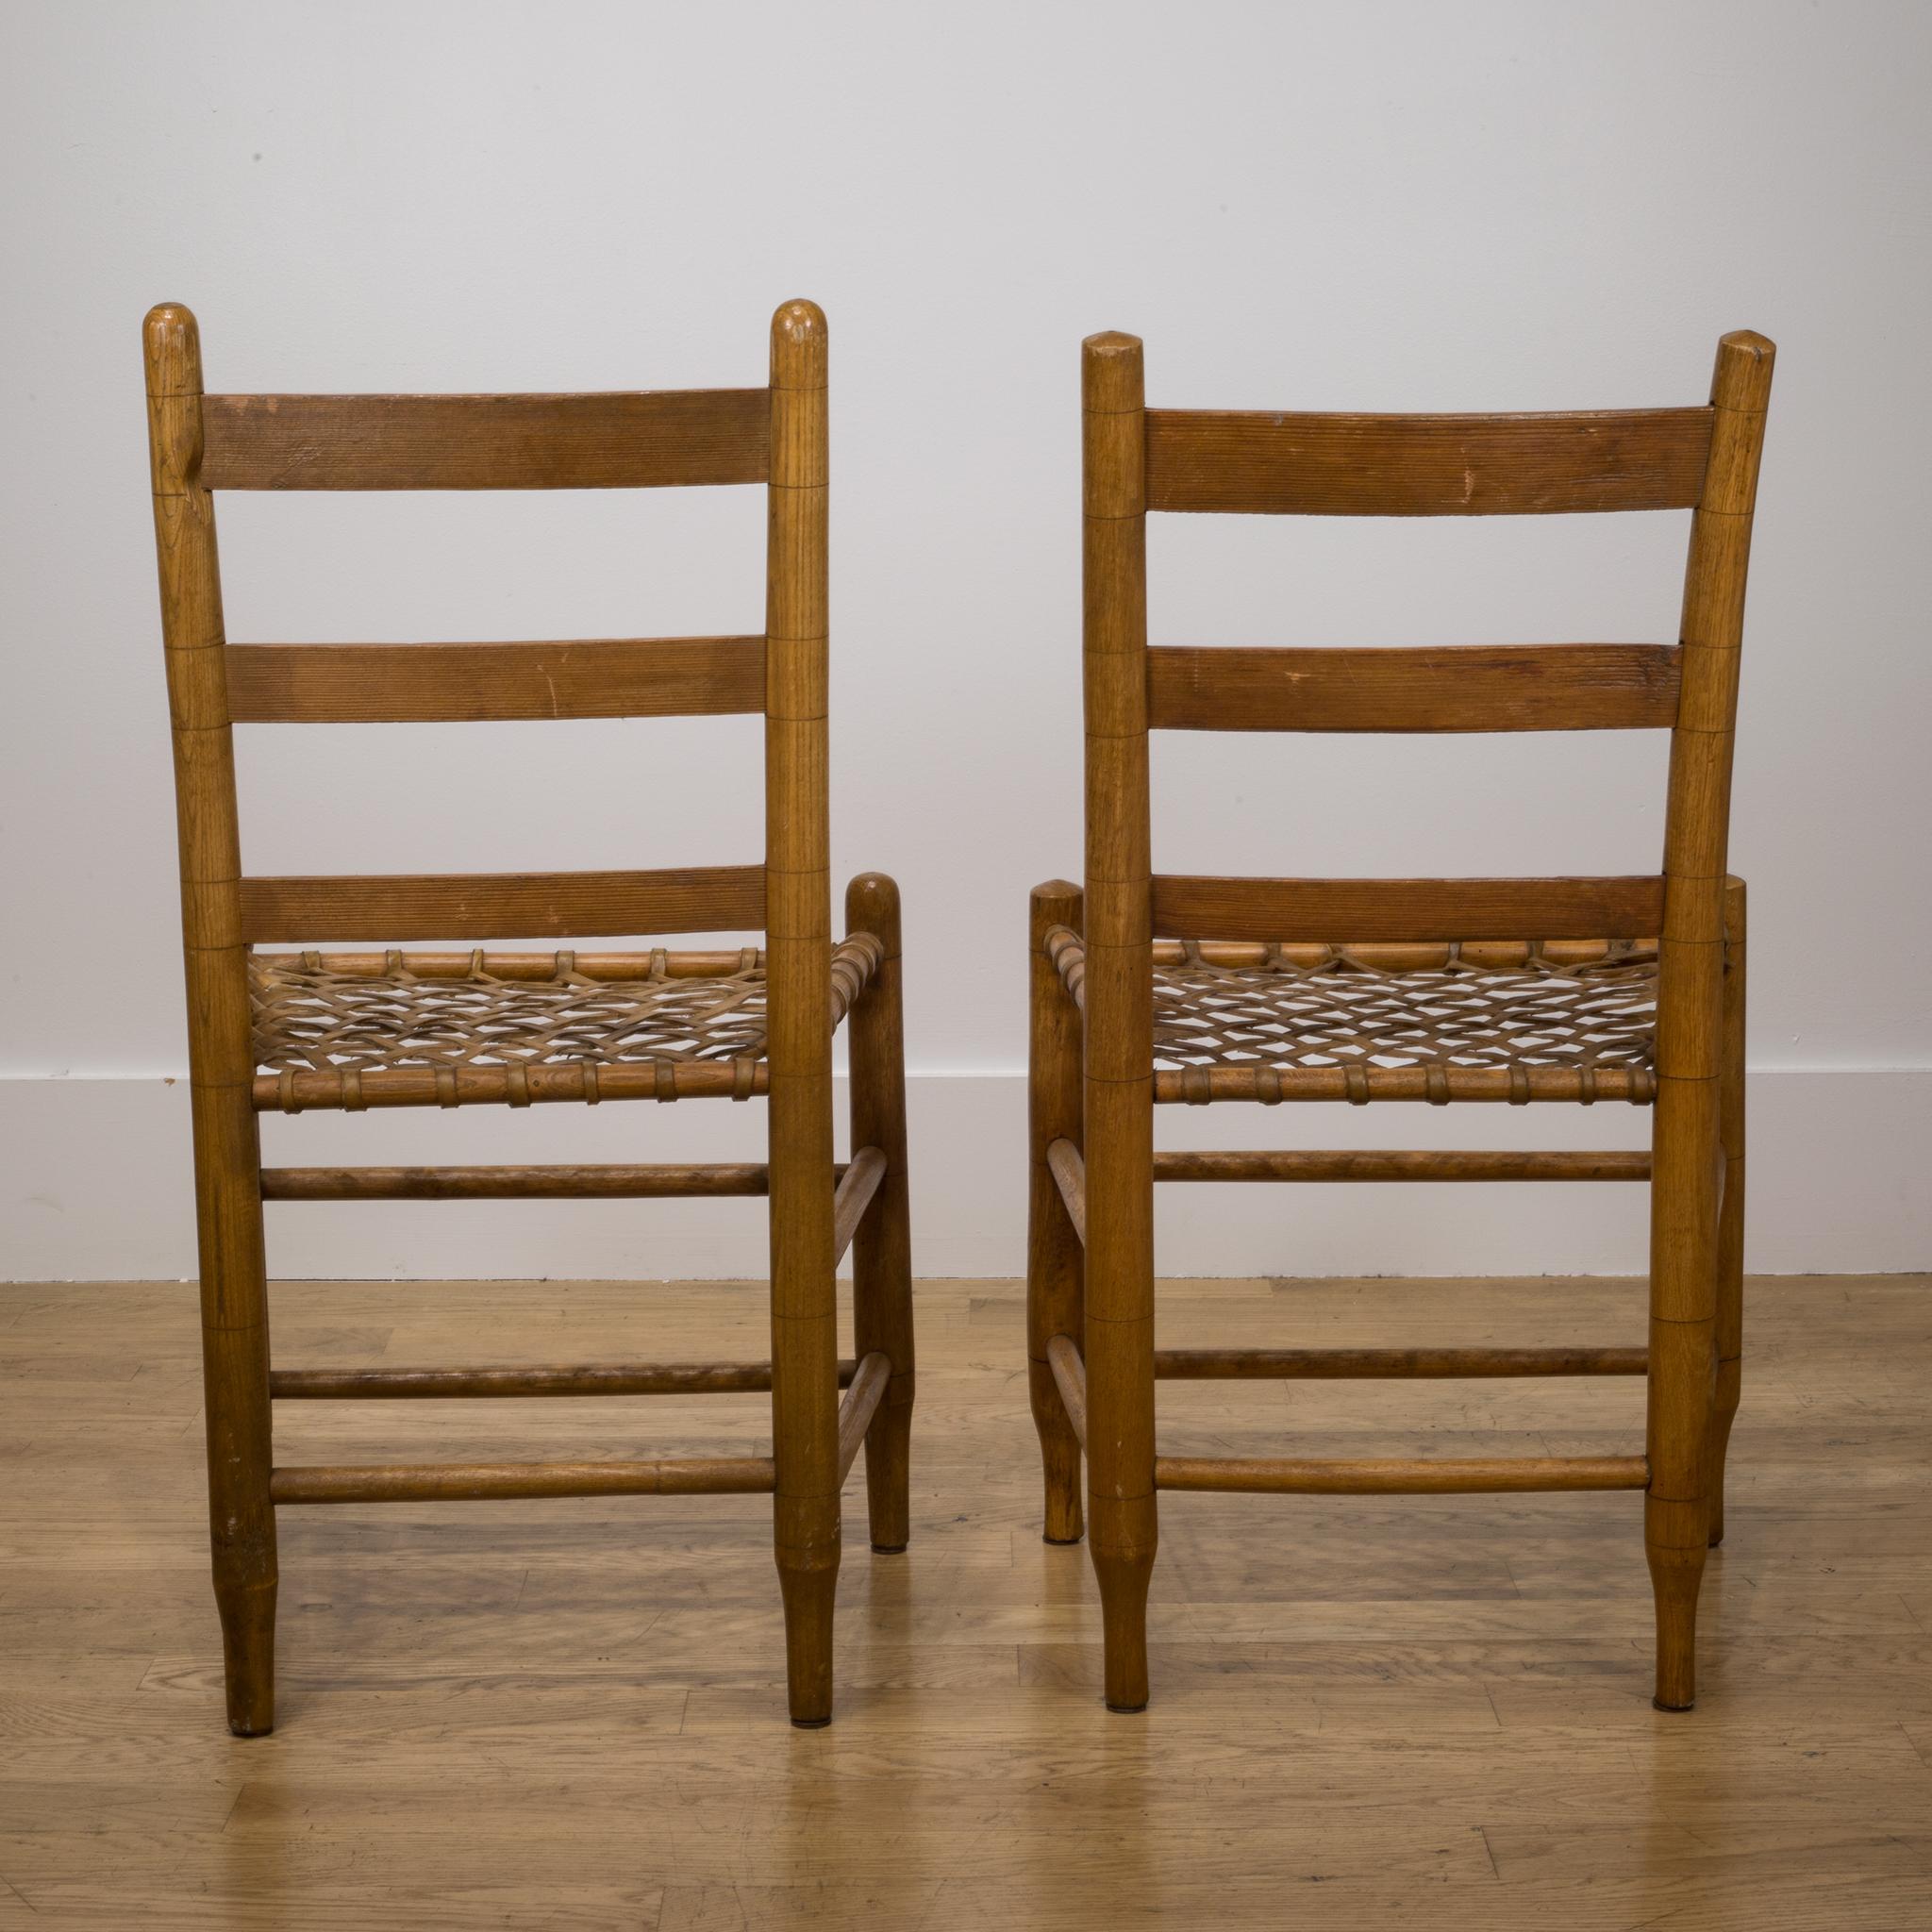 19th c. Handmade Wood/Rawhide Chairs from Historic  Oregon Commune c. 1856-1866 6